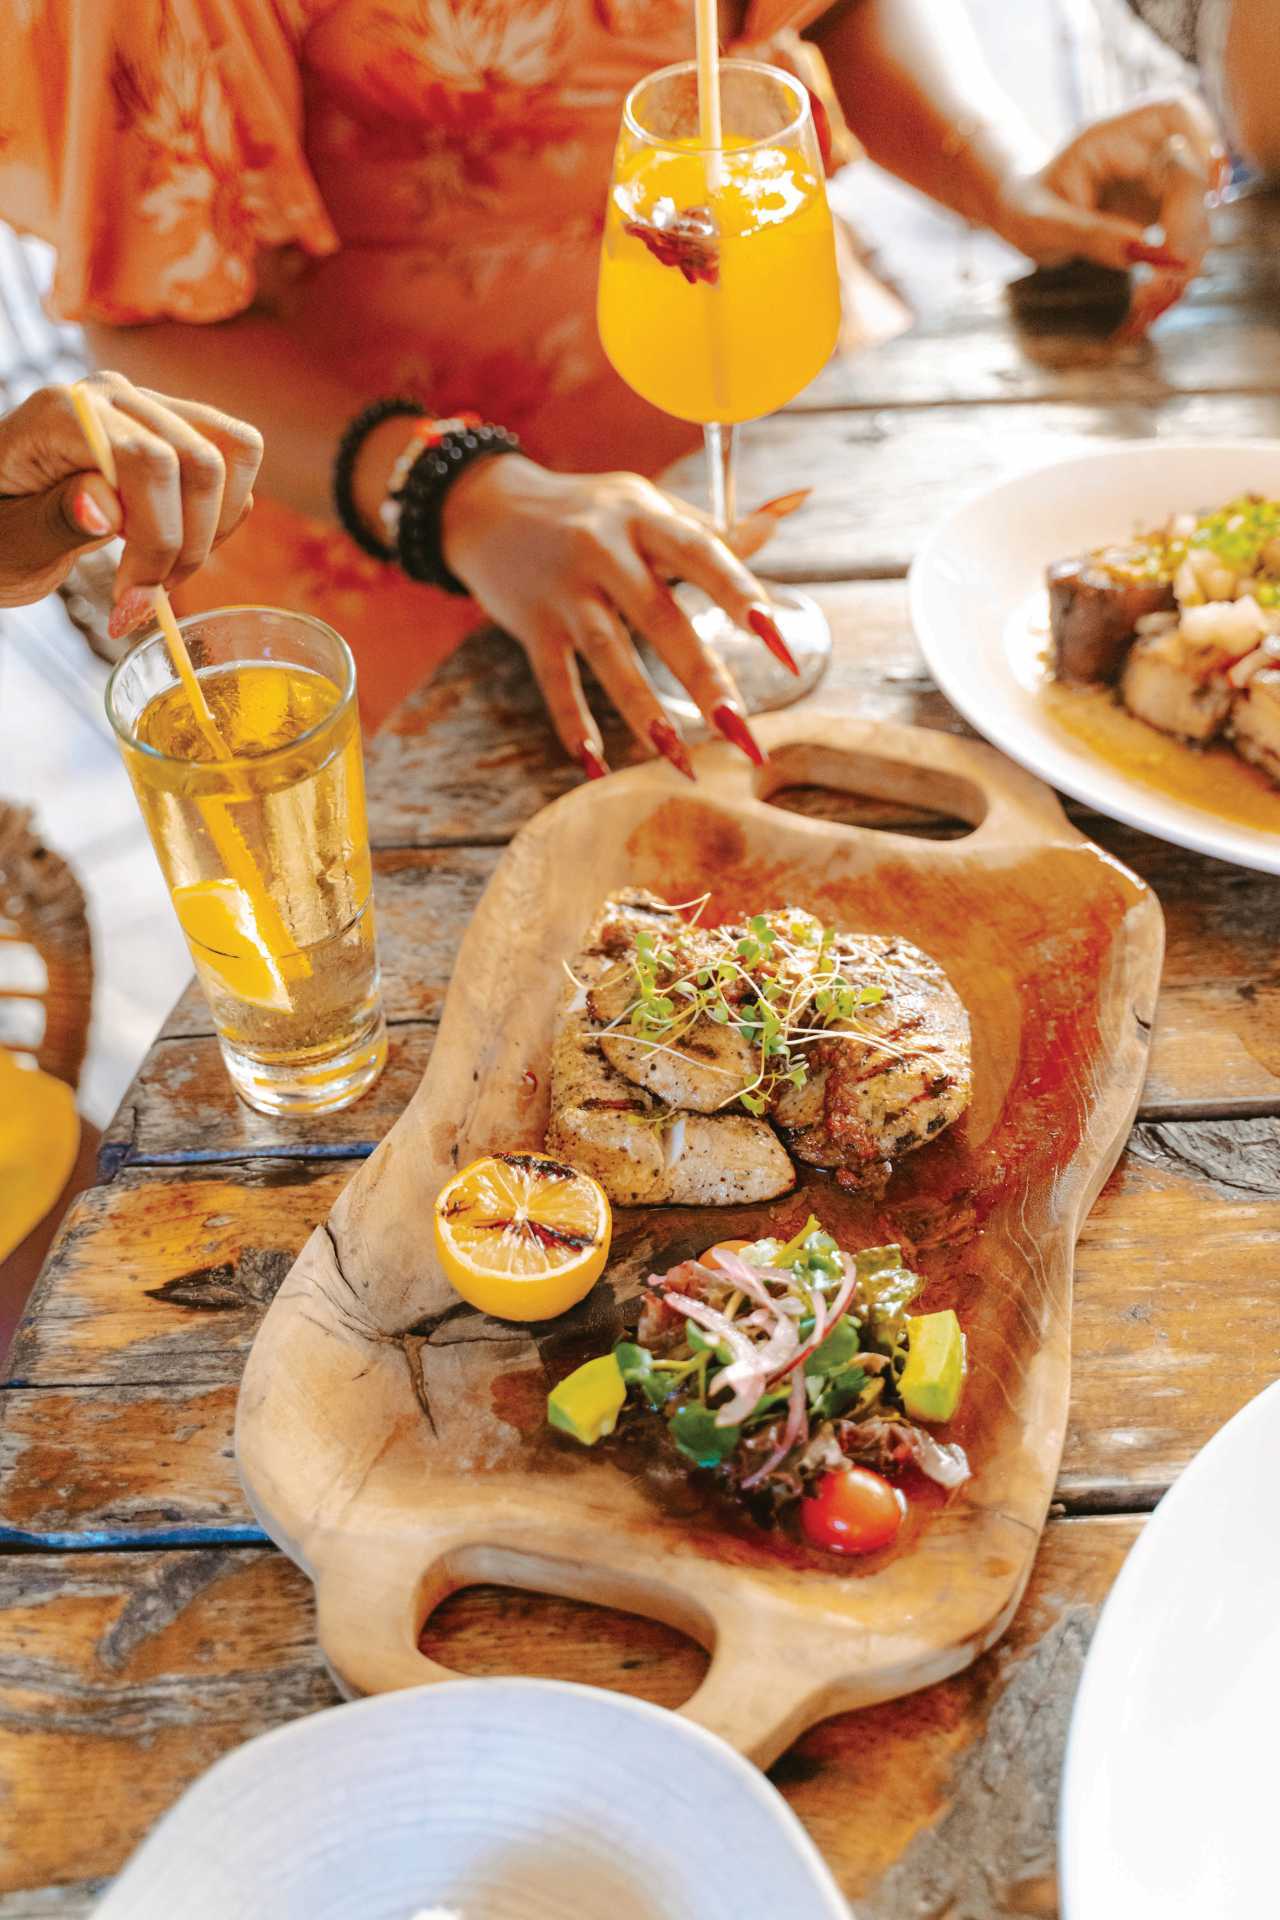 Barbados Rum and Food Festival | A spread of food and drinks